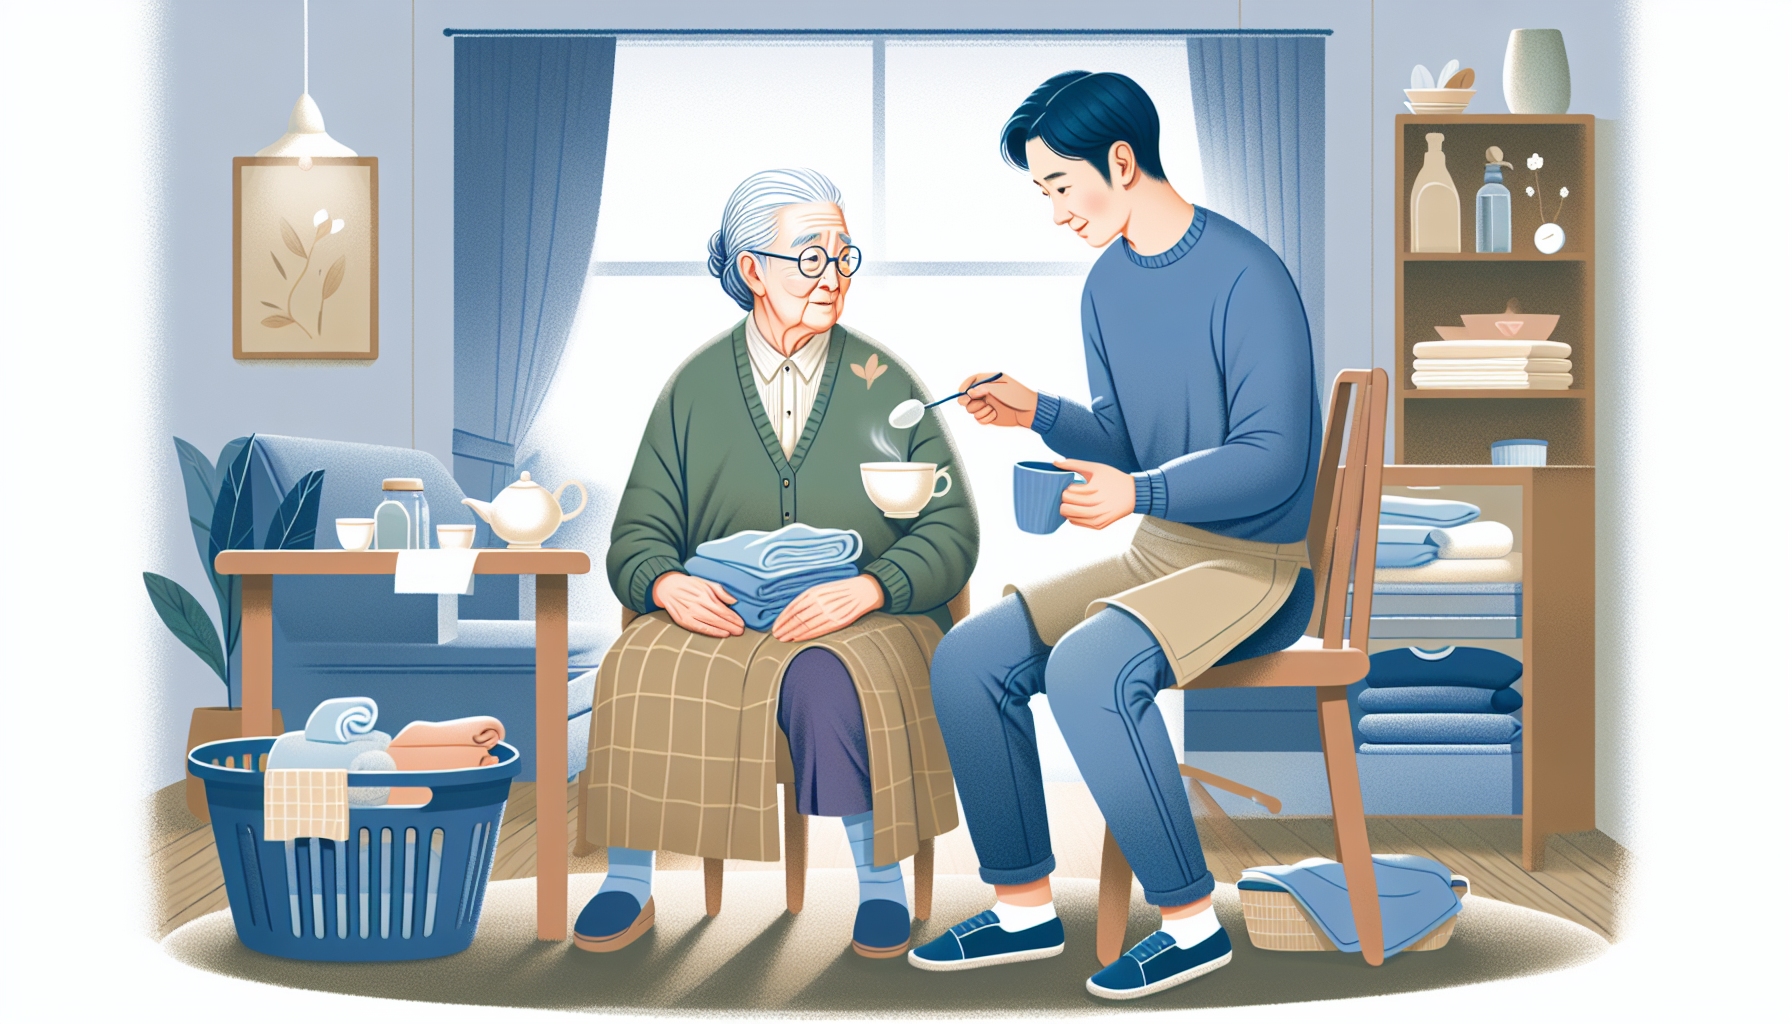 Illustration of a person with dementia needing assistance with daily activities from 2nd Family